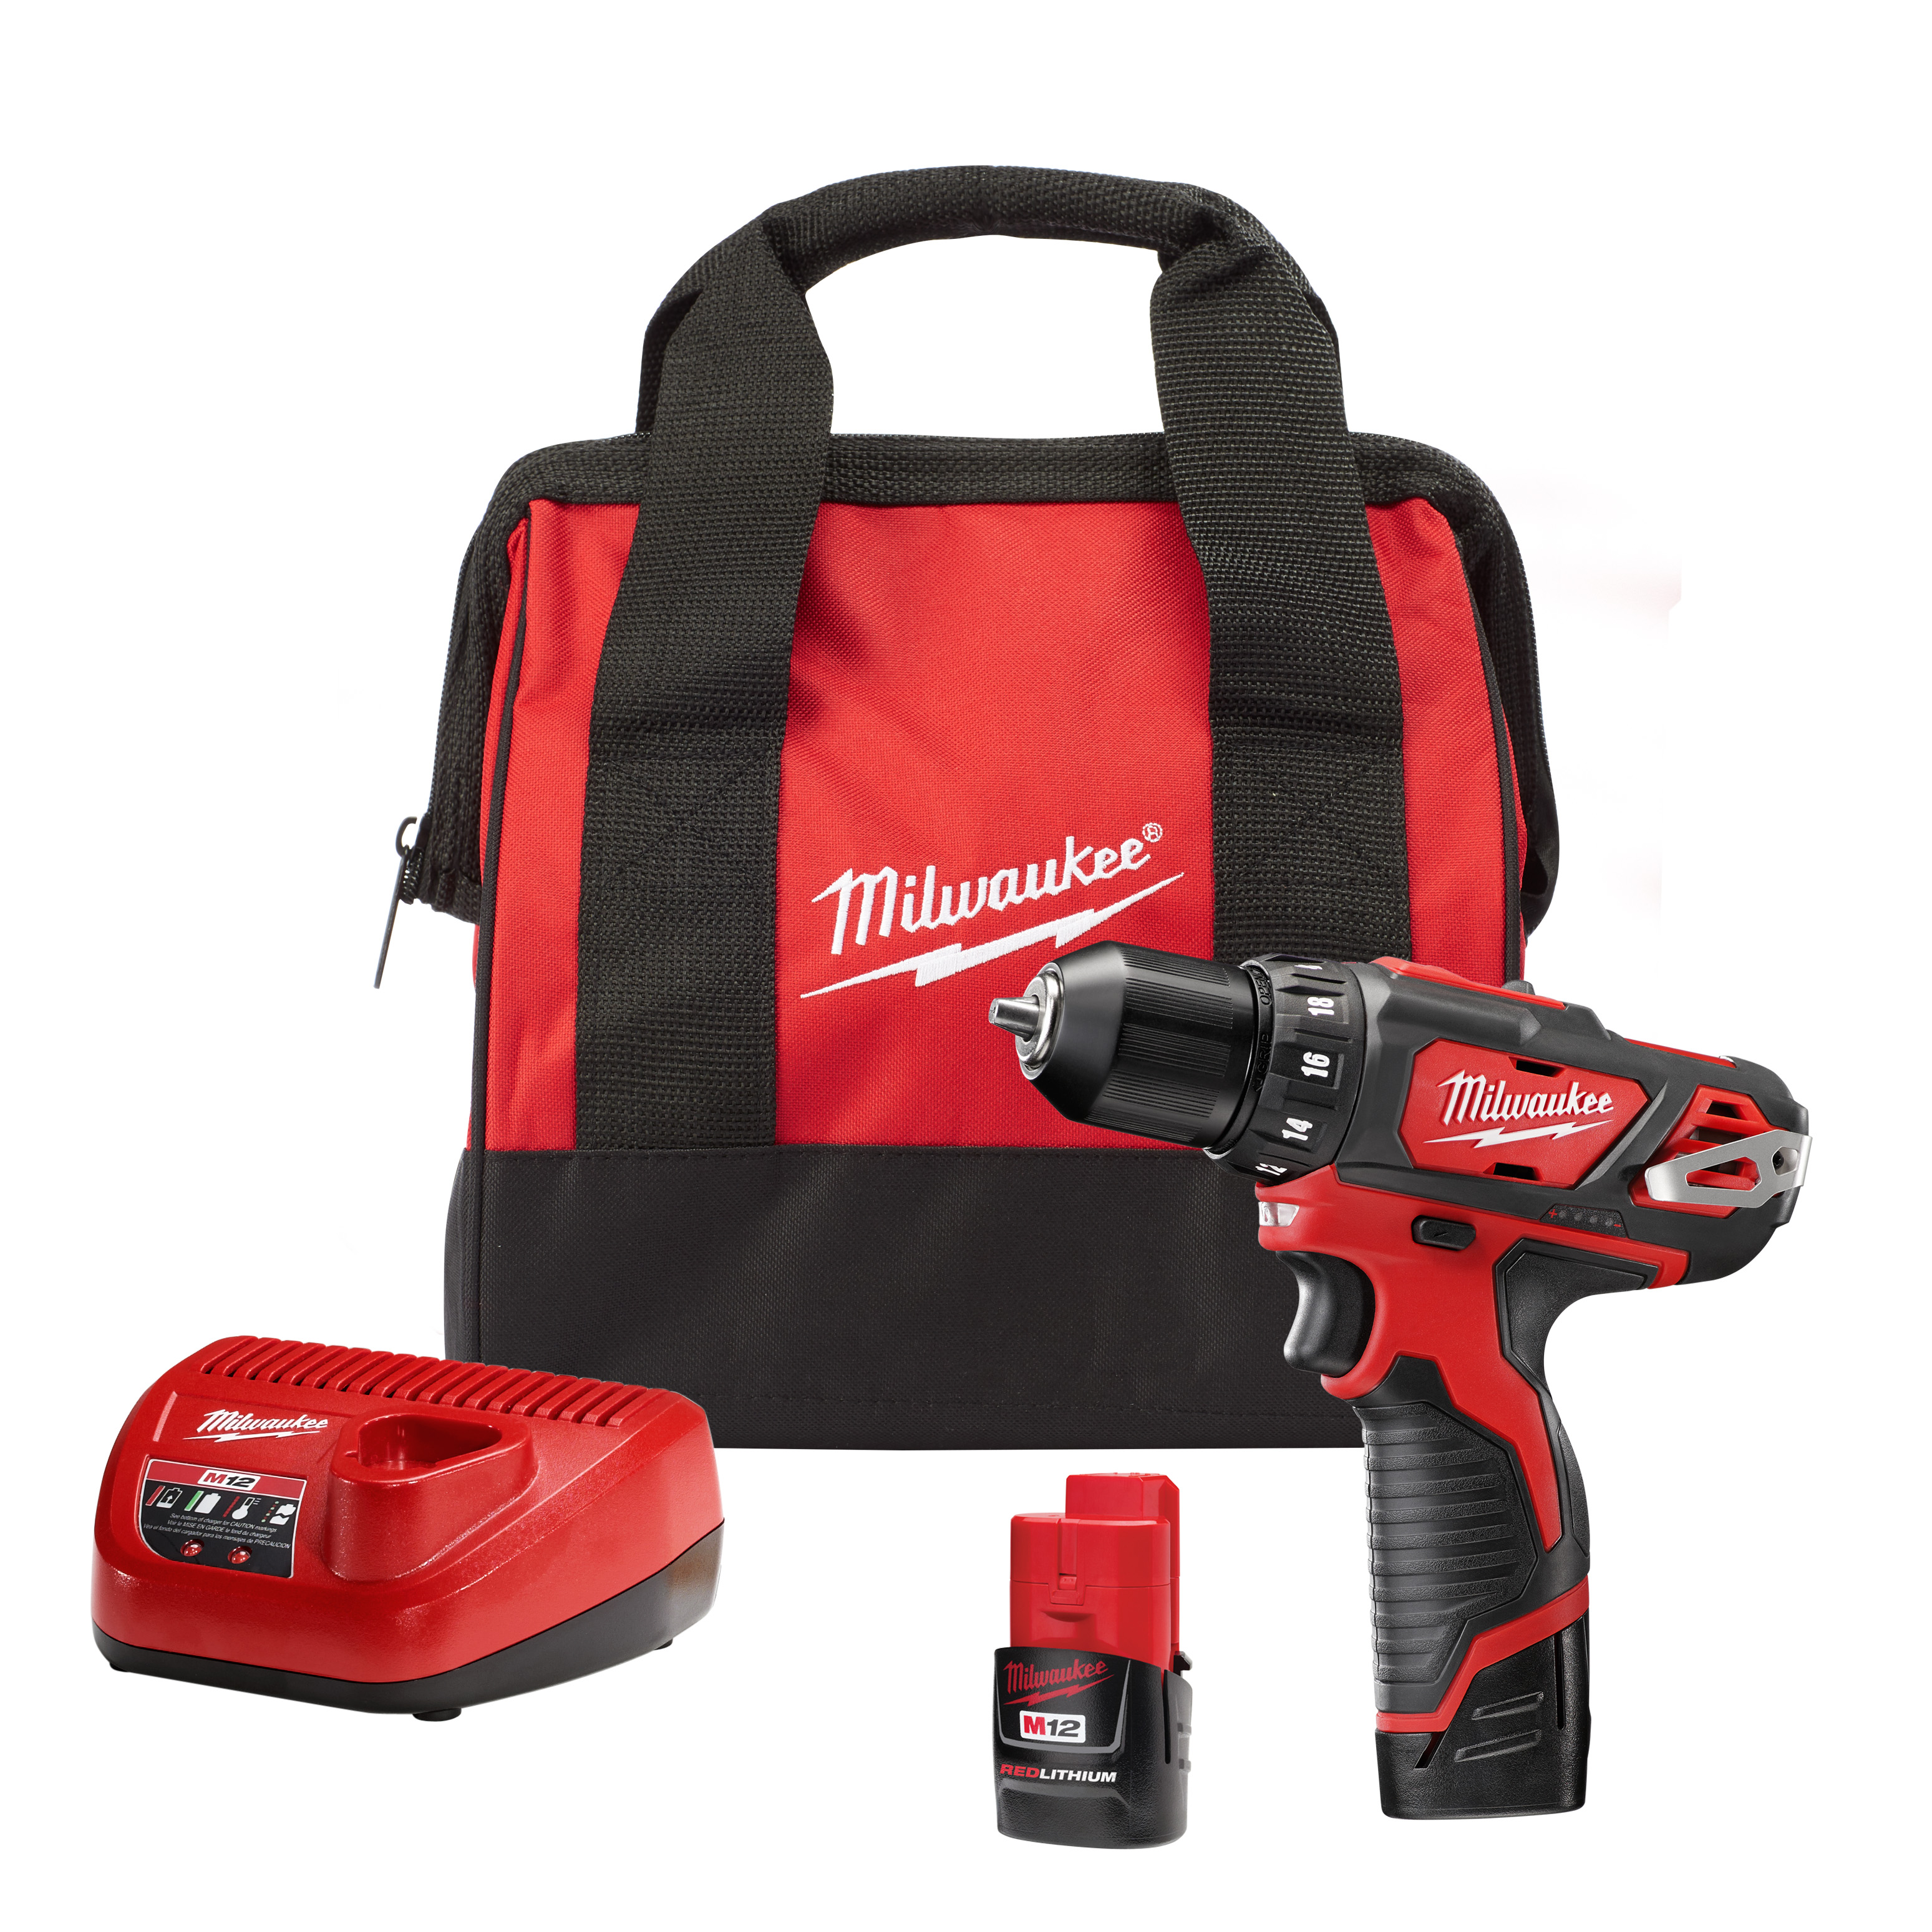 M12 12 Volt Lithium-Ion Cordless 3/8 in. Drill/Driver Kit